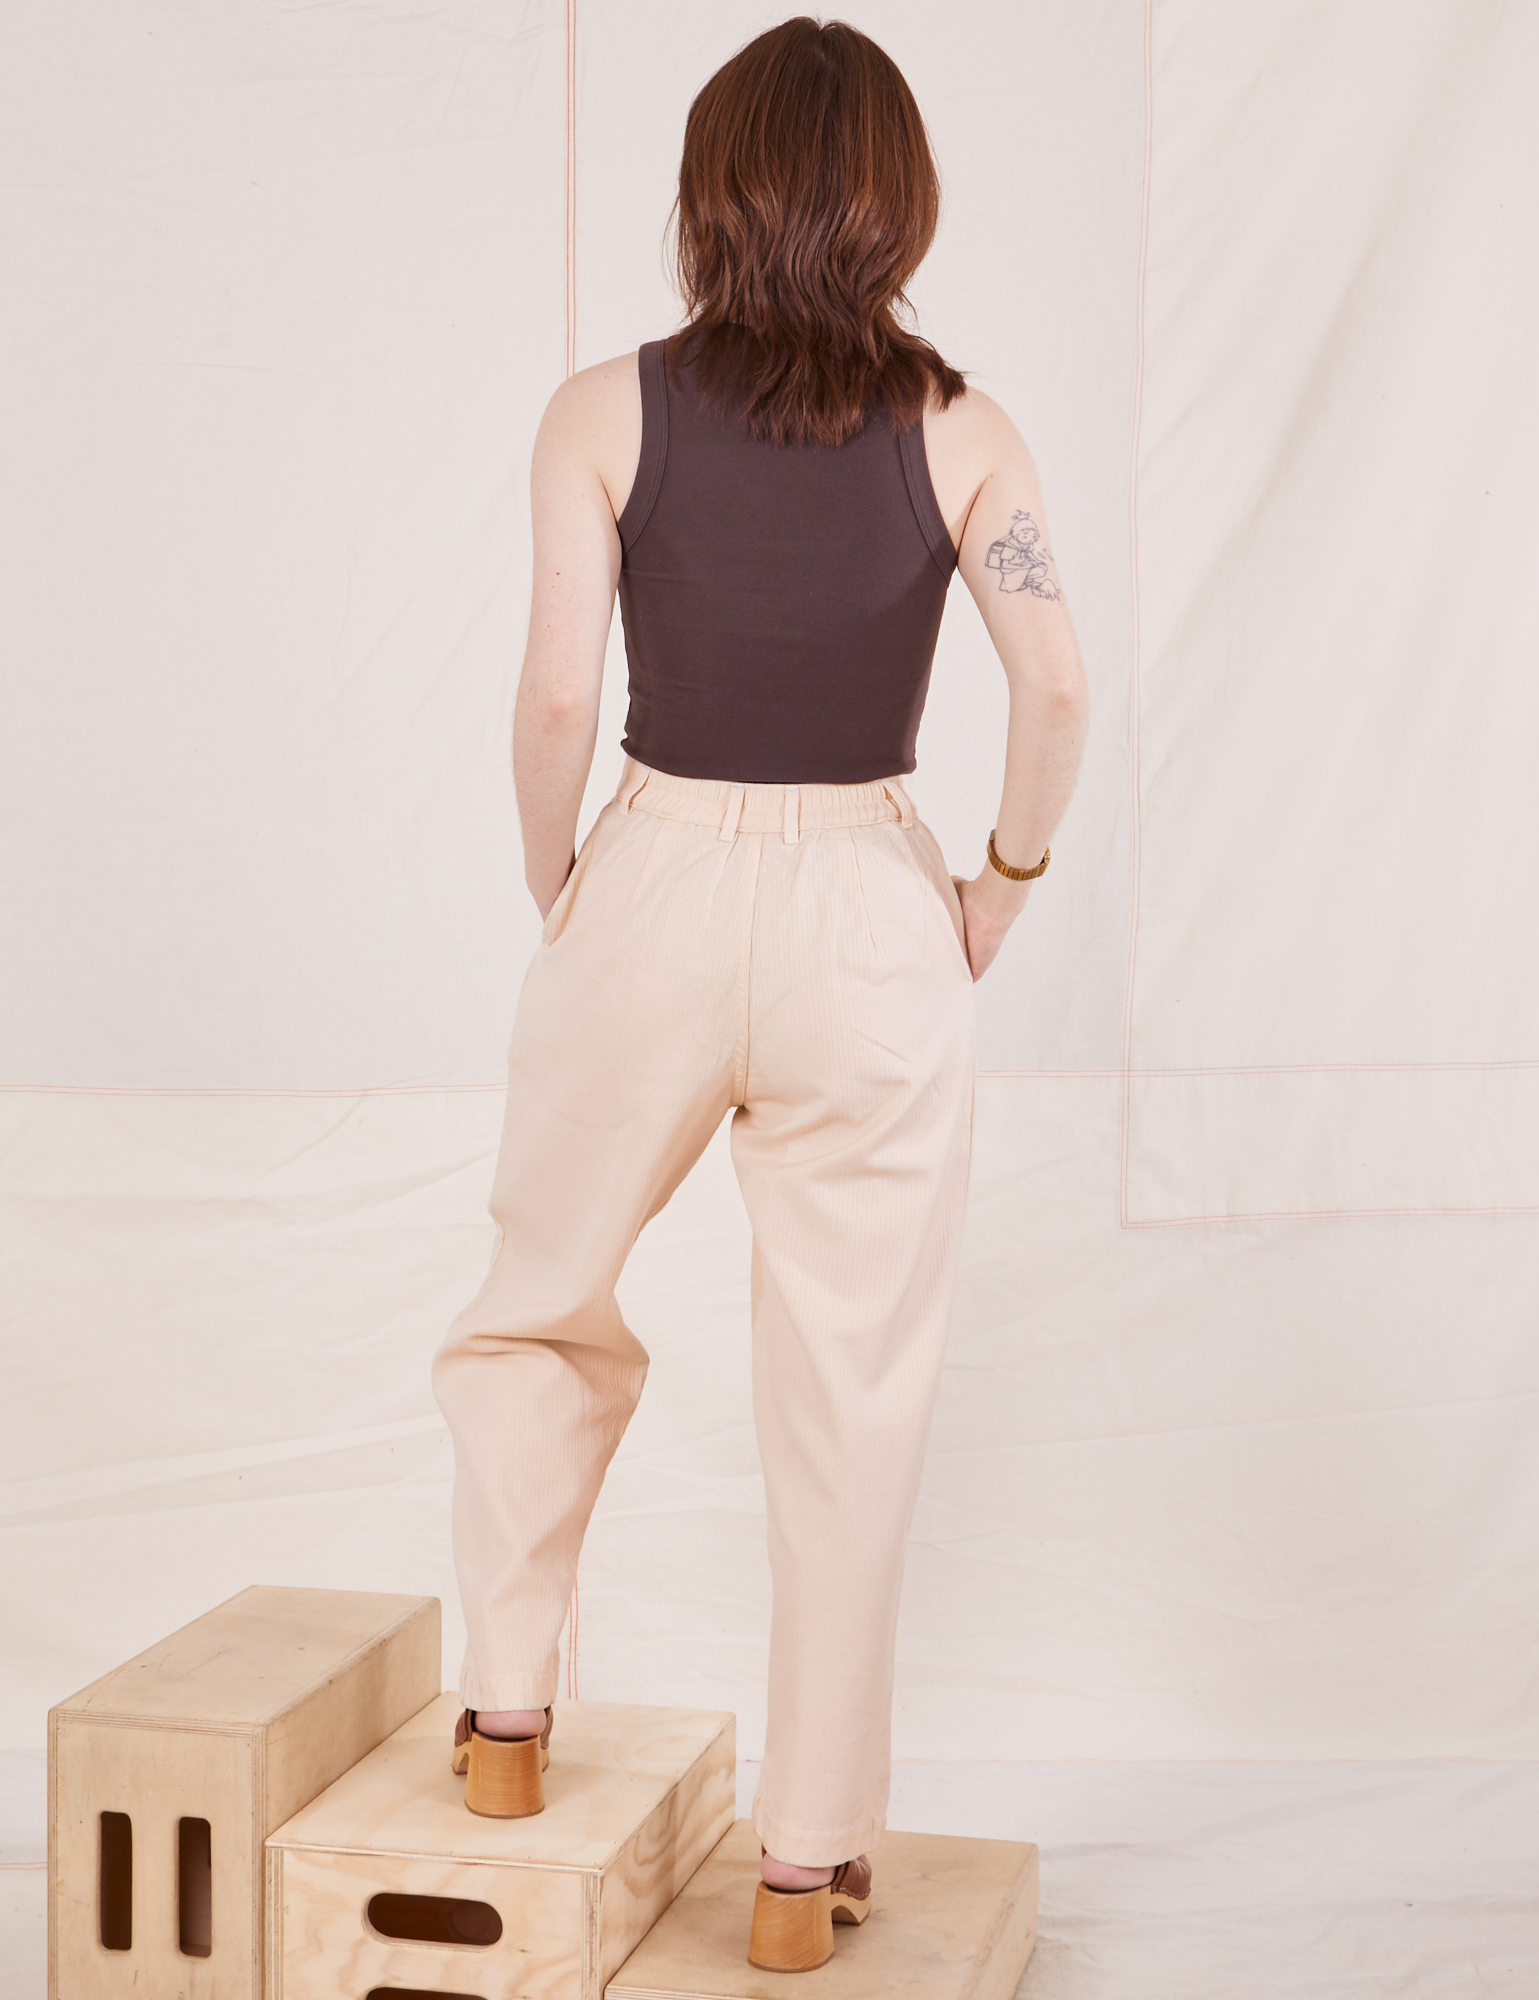 Heritage Trousers in Vintage Off-White back view on Hana